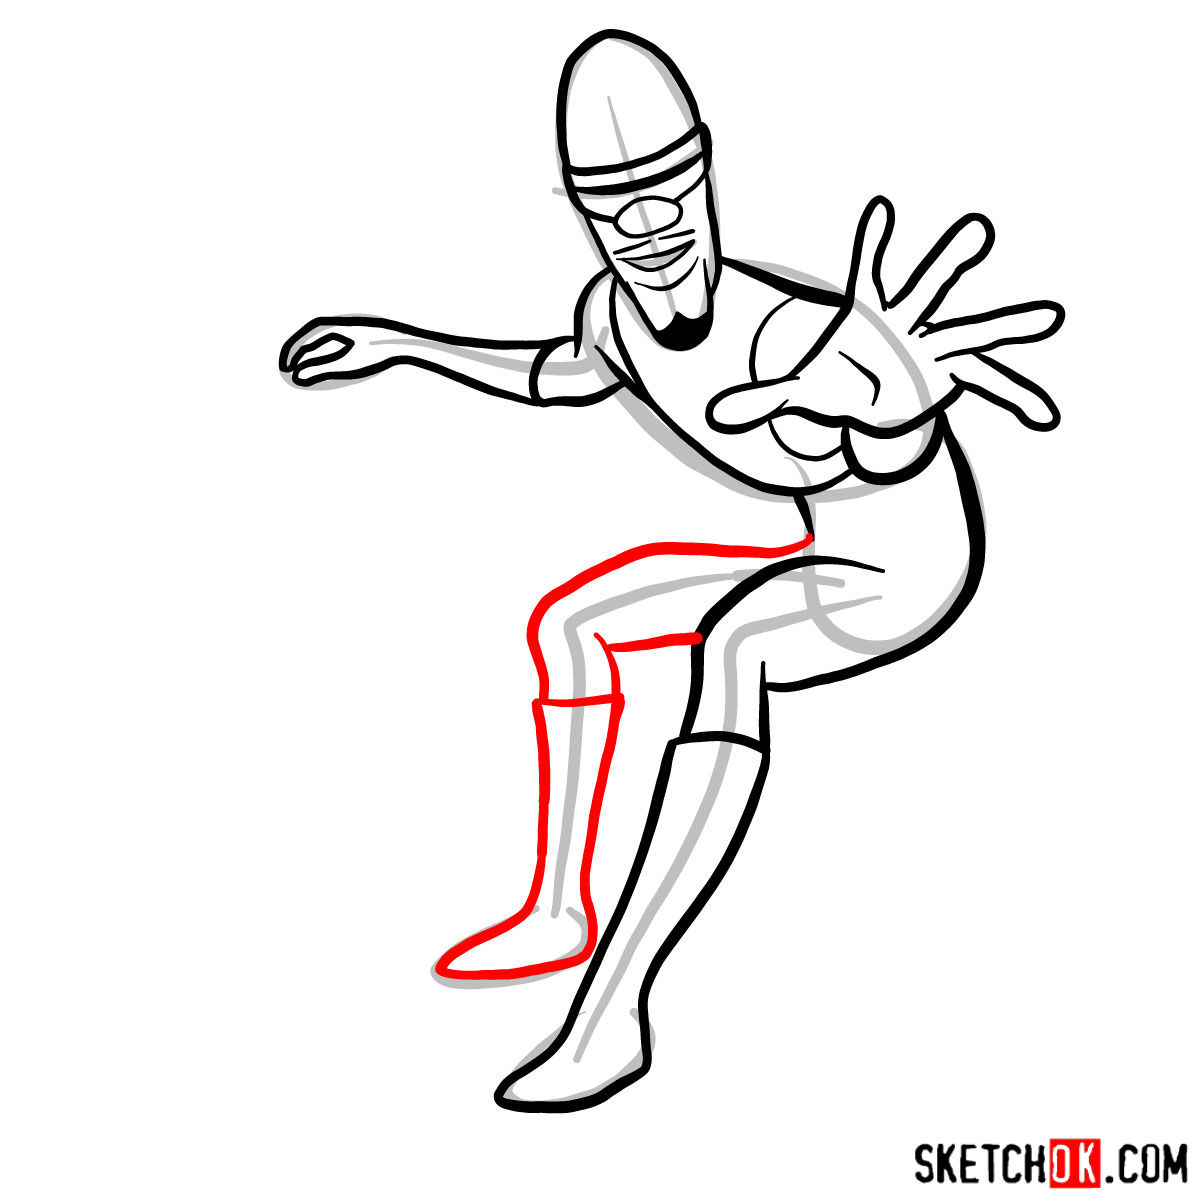 How to draw Lucius Best (Frozone) - step 10